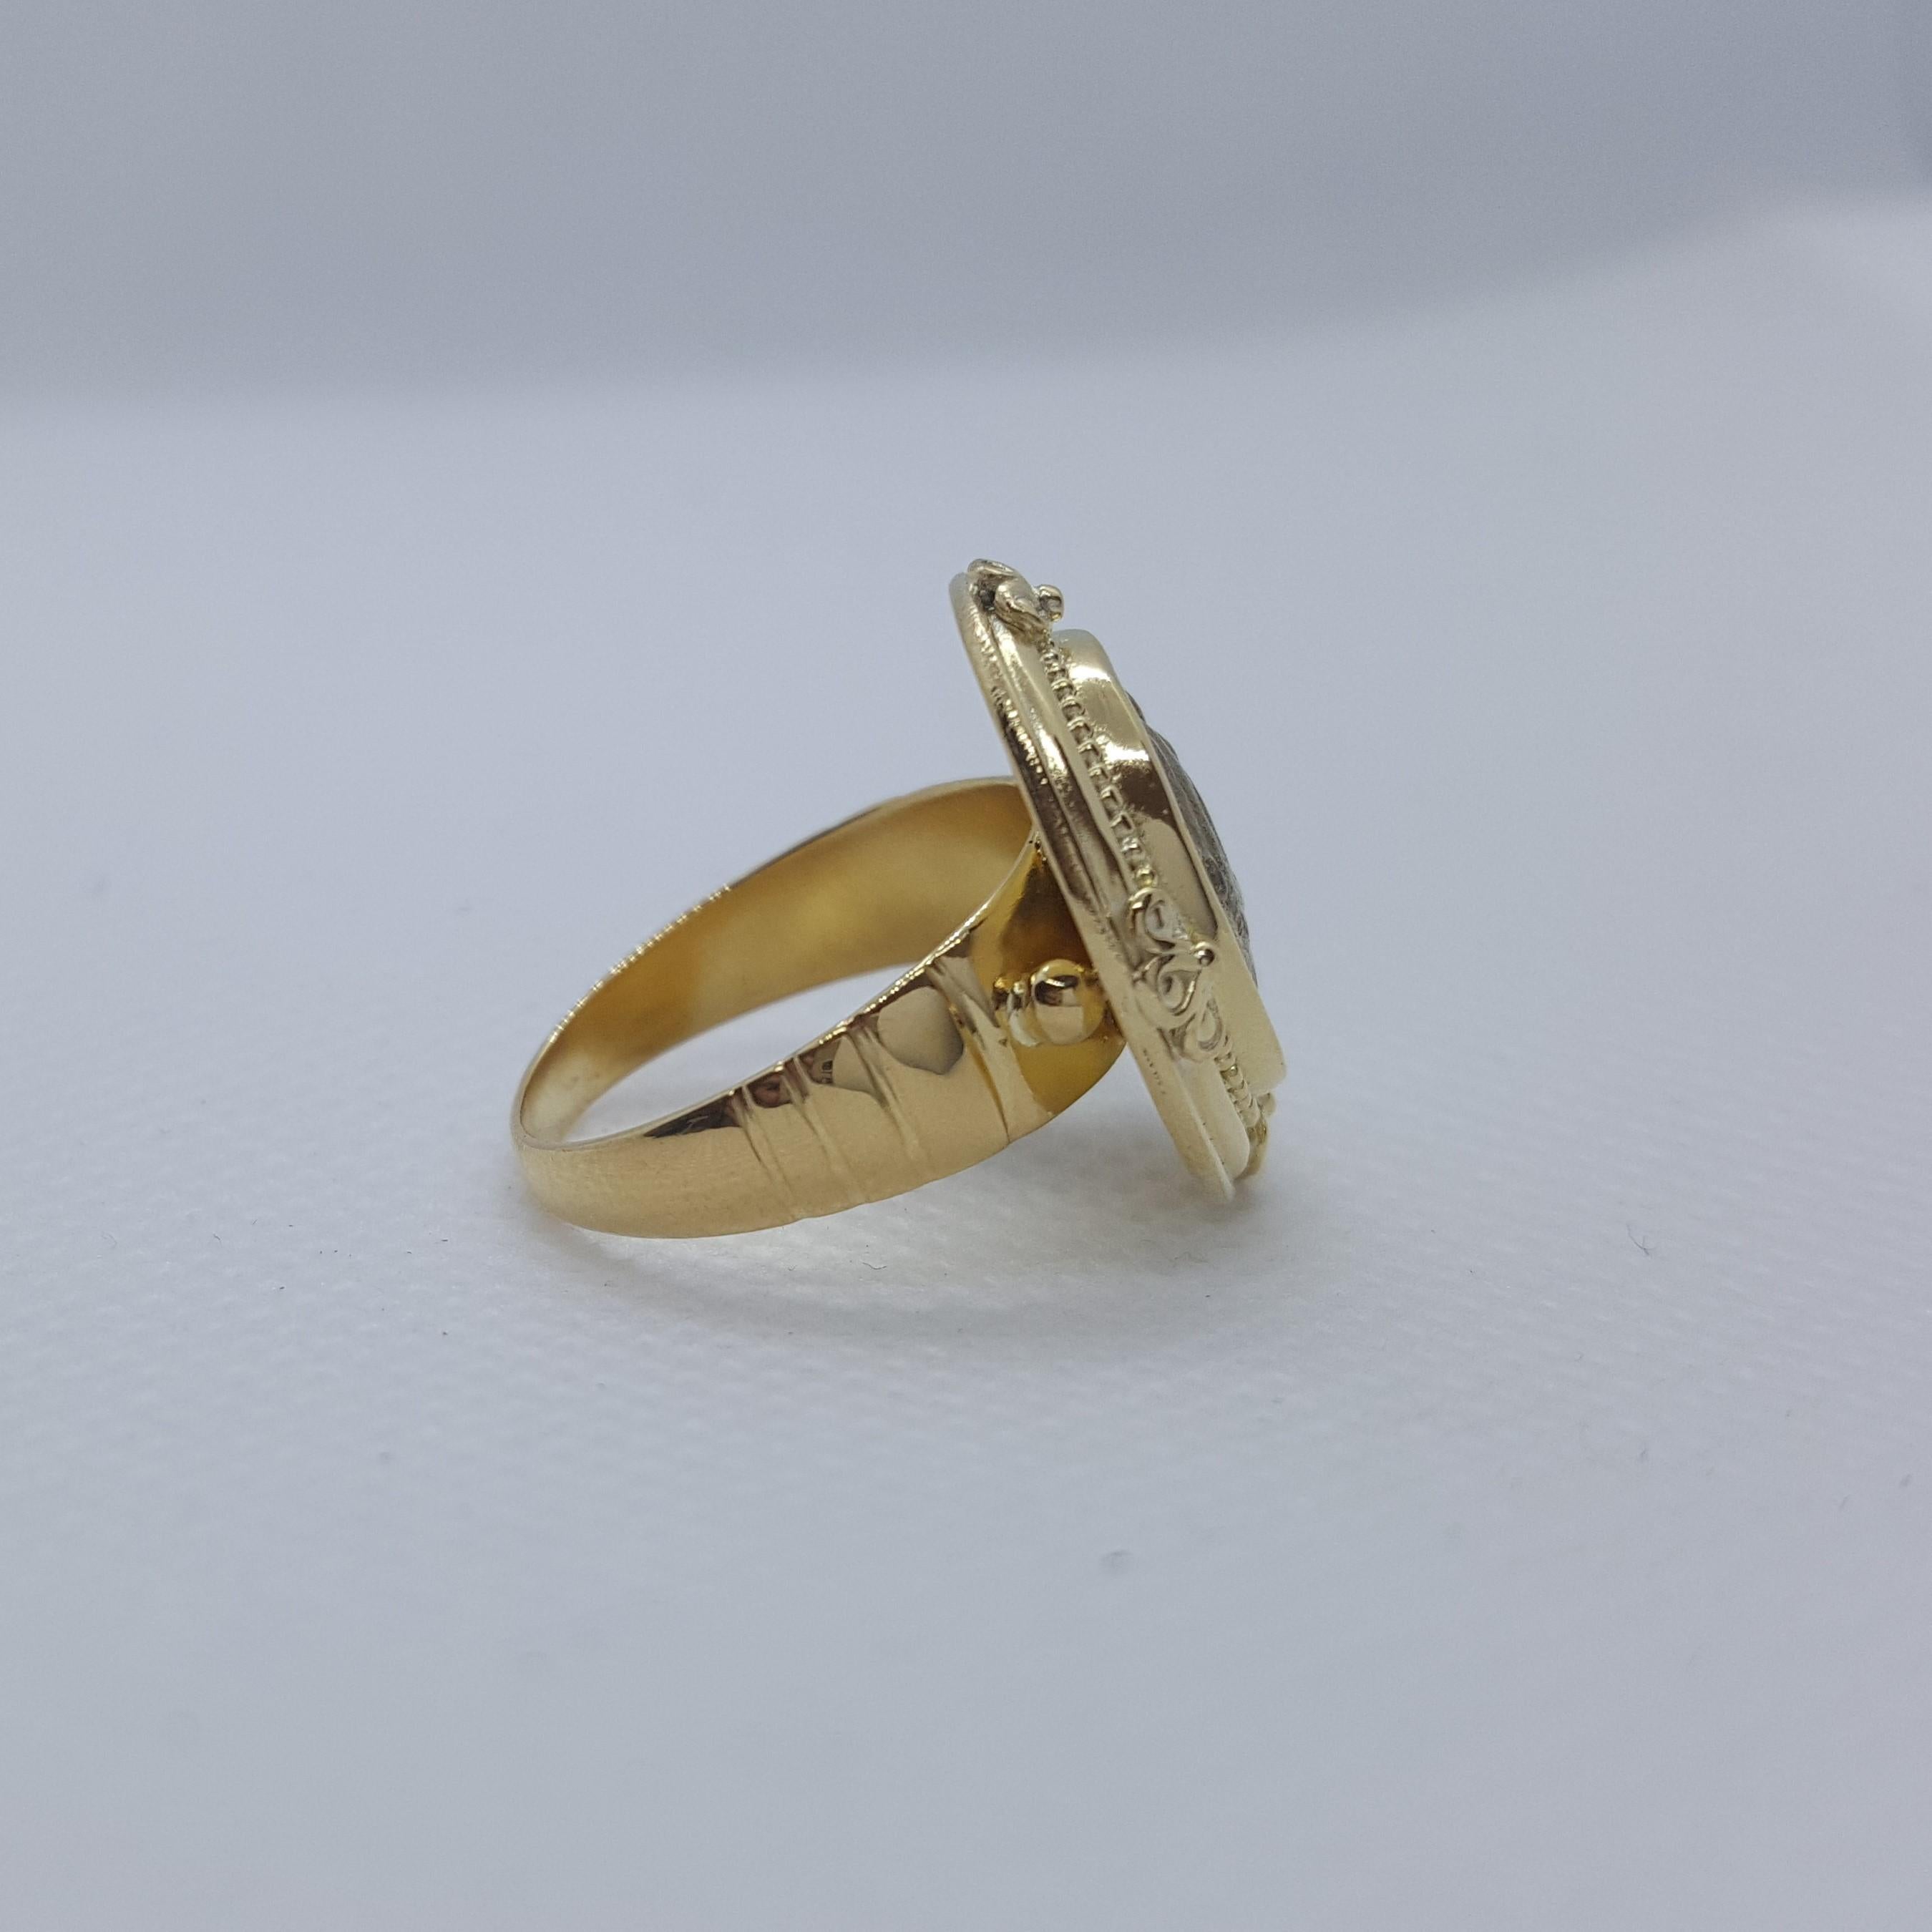 Beautiful unique 22kt yellow gold bezel ring holding an ancient Greek coin. The top bezel is a unique beaded design that's 19mm in width; the shank of the ring is 6.5mm tapering to 2.5mm, 4.4mm thick and stamped 22K. The size of the ring is 6.75. 